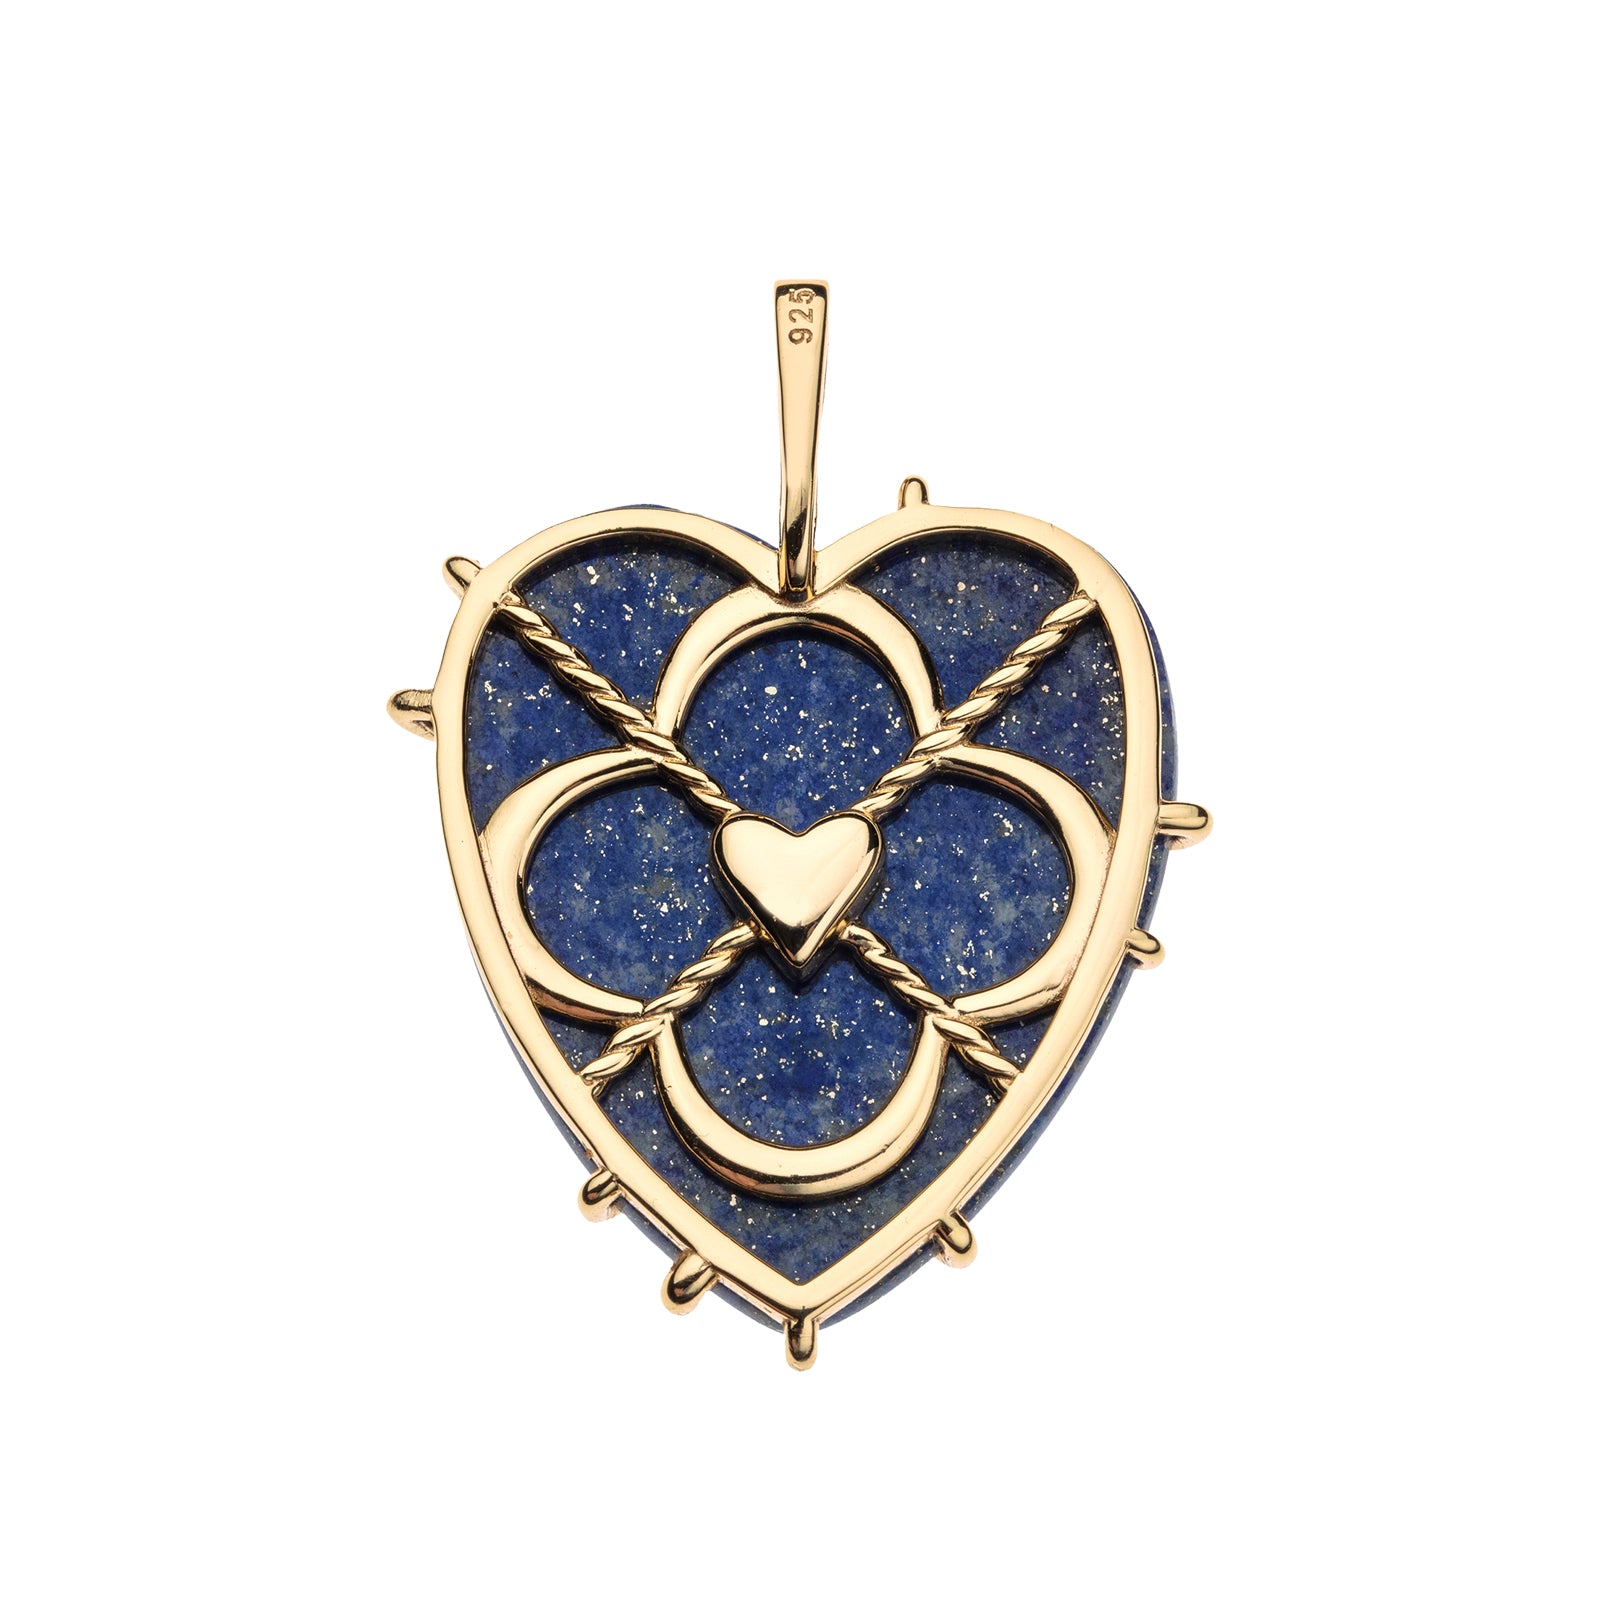 LOVE Carry Your Heart Pendant in Lapis